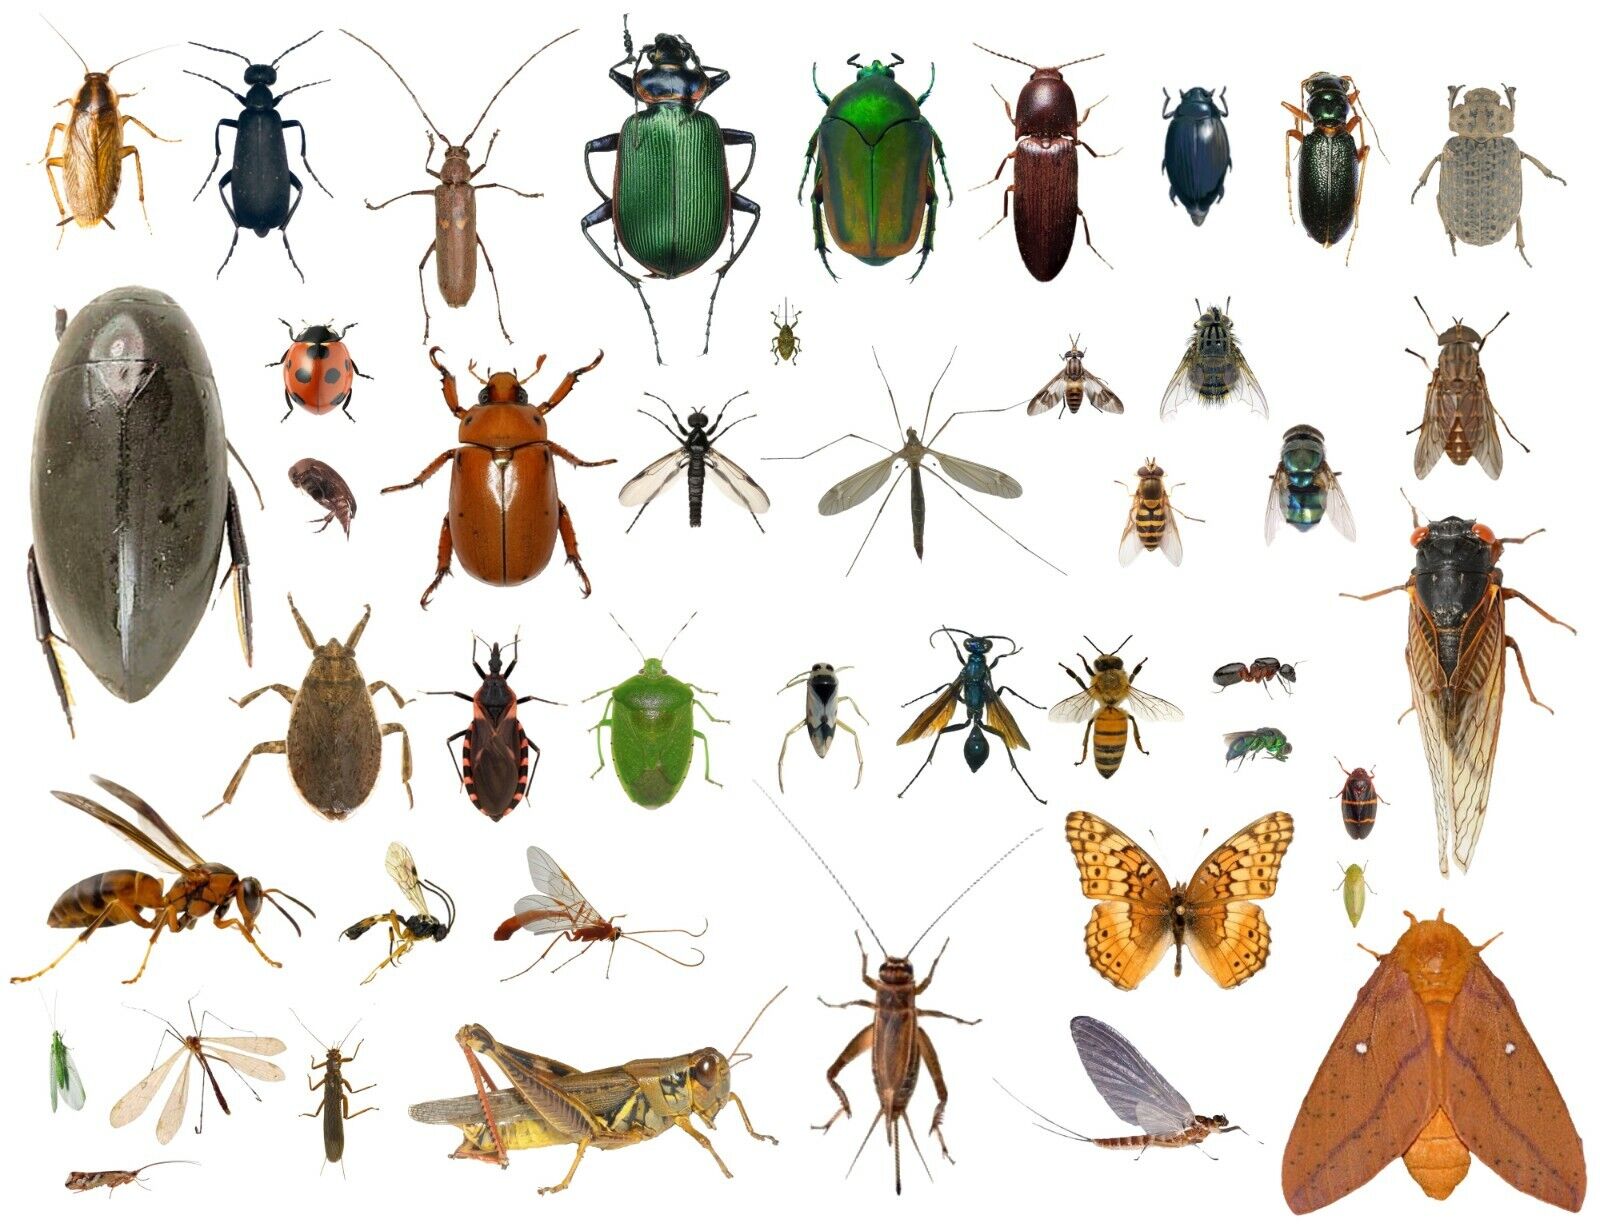 35+ Dead Bugs Entomology Class Insect Bug Collection IDENTIFIED USA In Alcohol